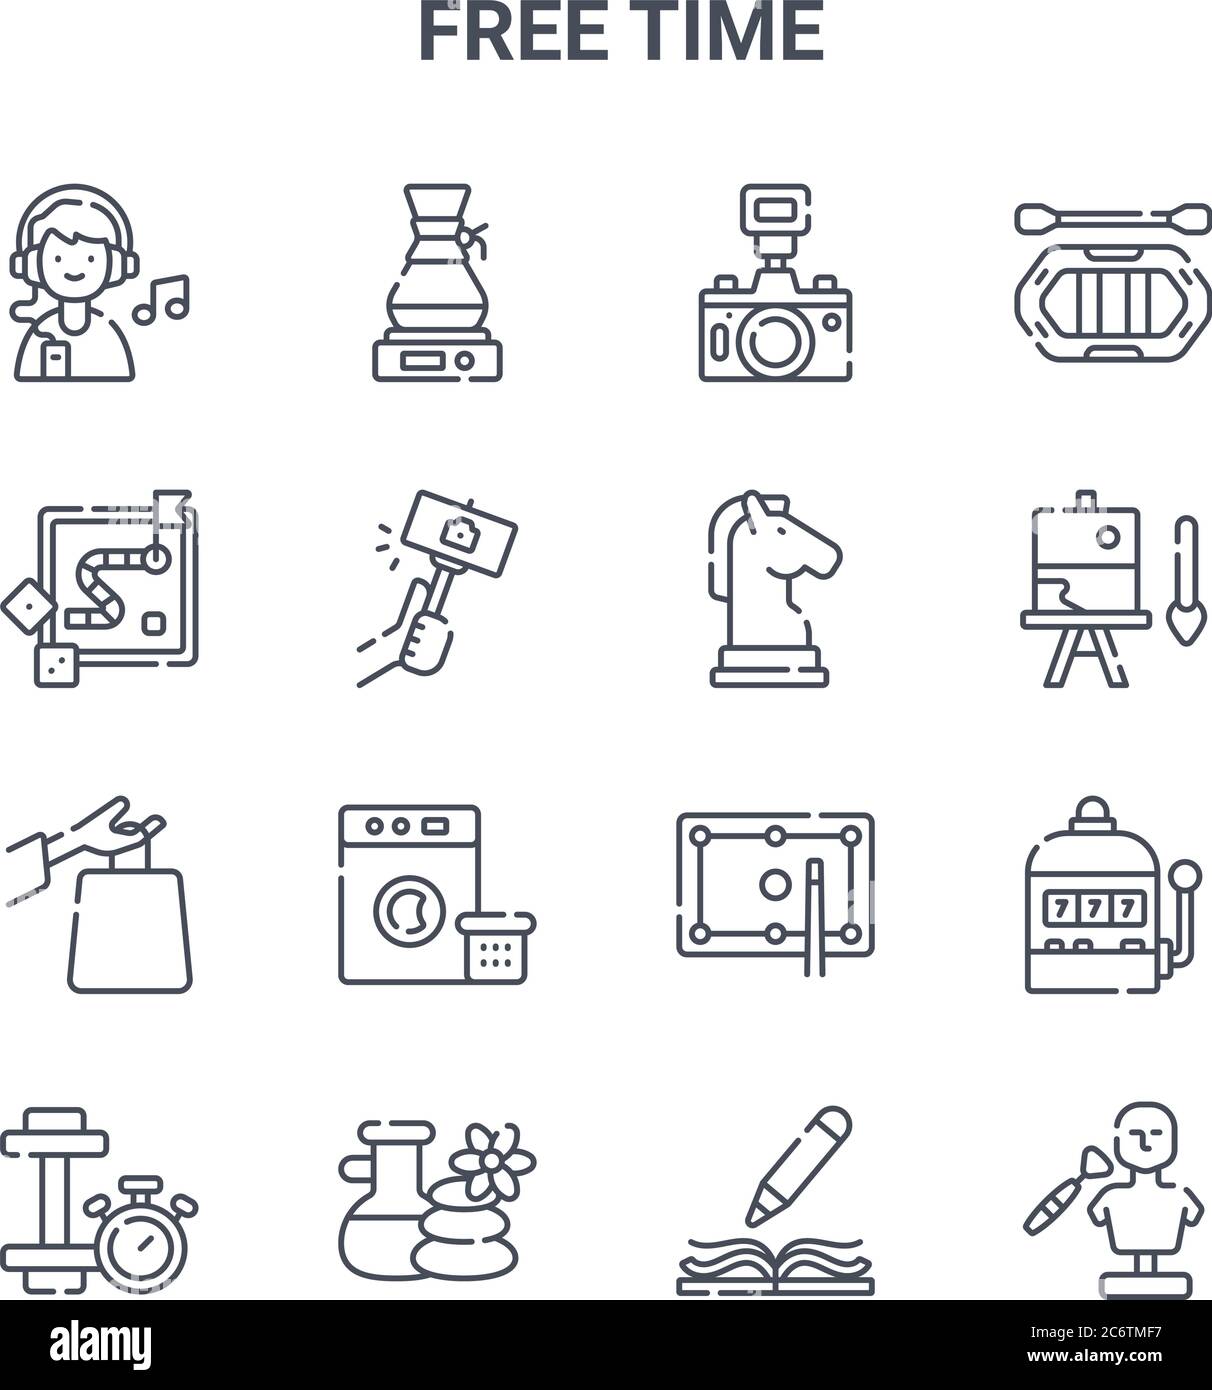 Paint board - Free art icons